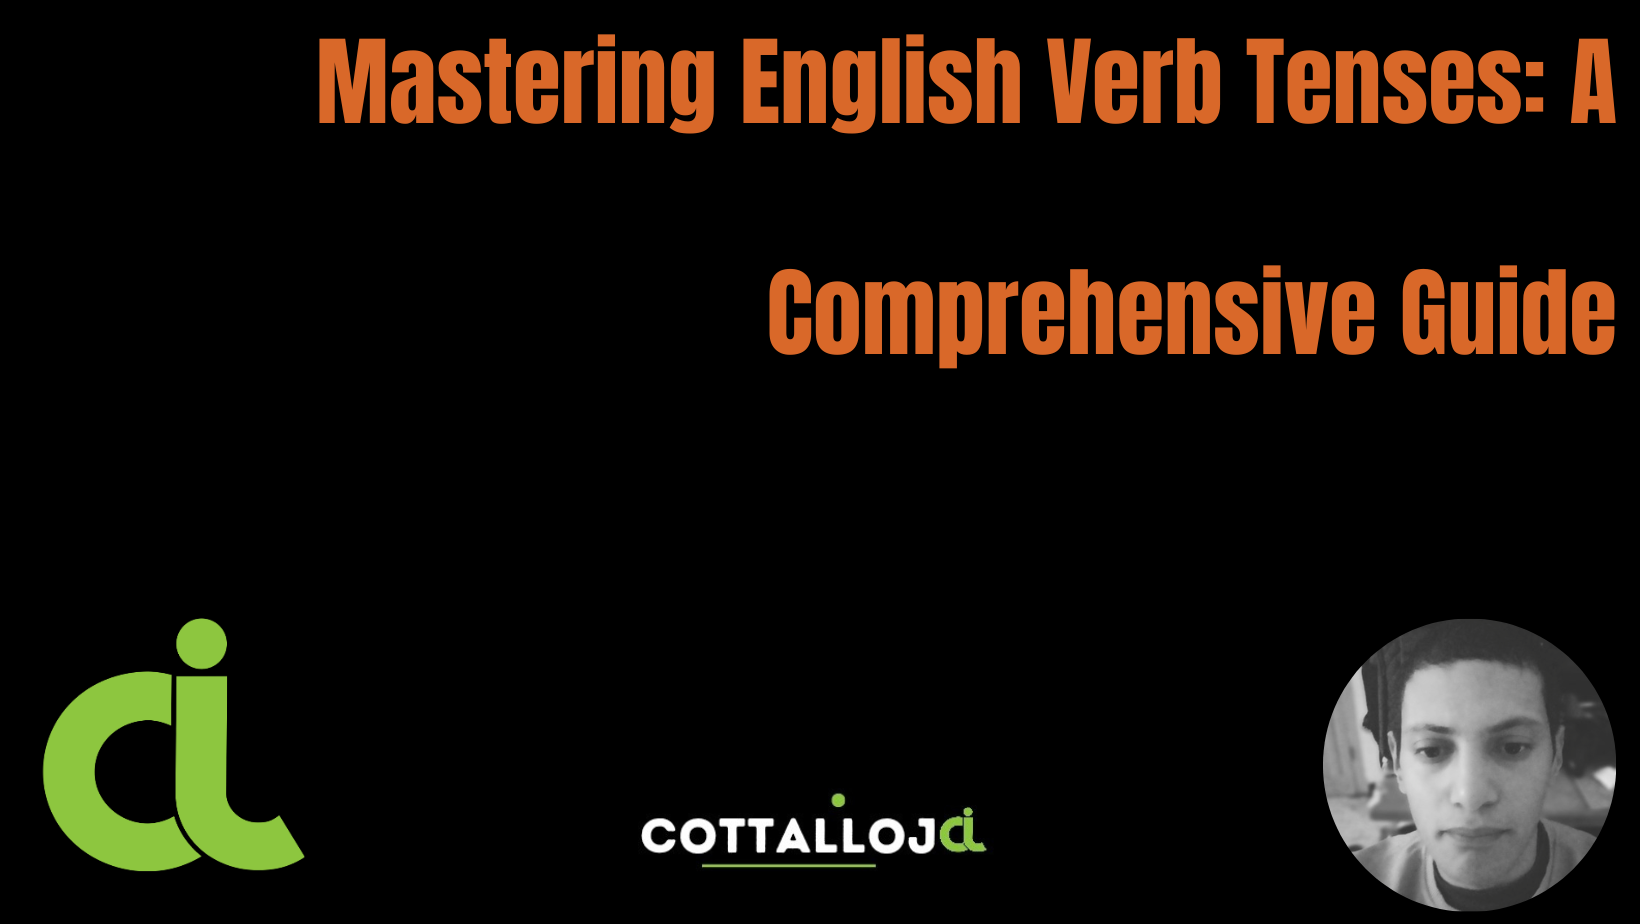 Mastering English Verb Tenses: A Comprehensive Guide